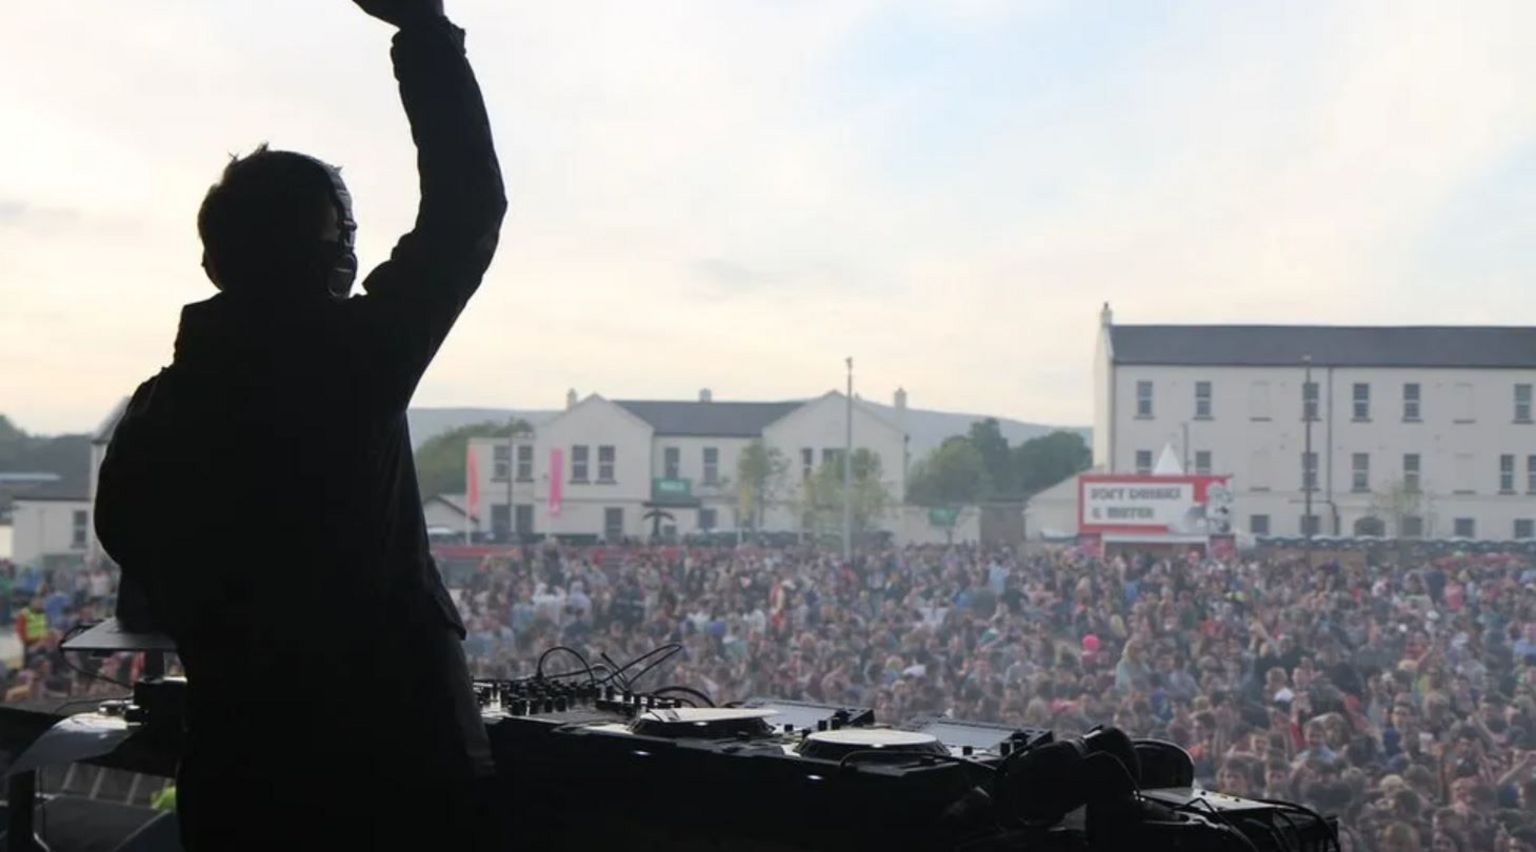 Pete Tong performing at Ebrington Square as part of Radio 1's Big Weekend in 2013